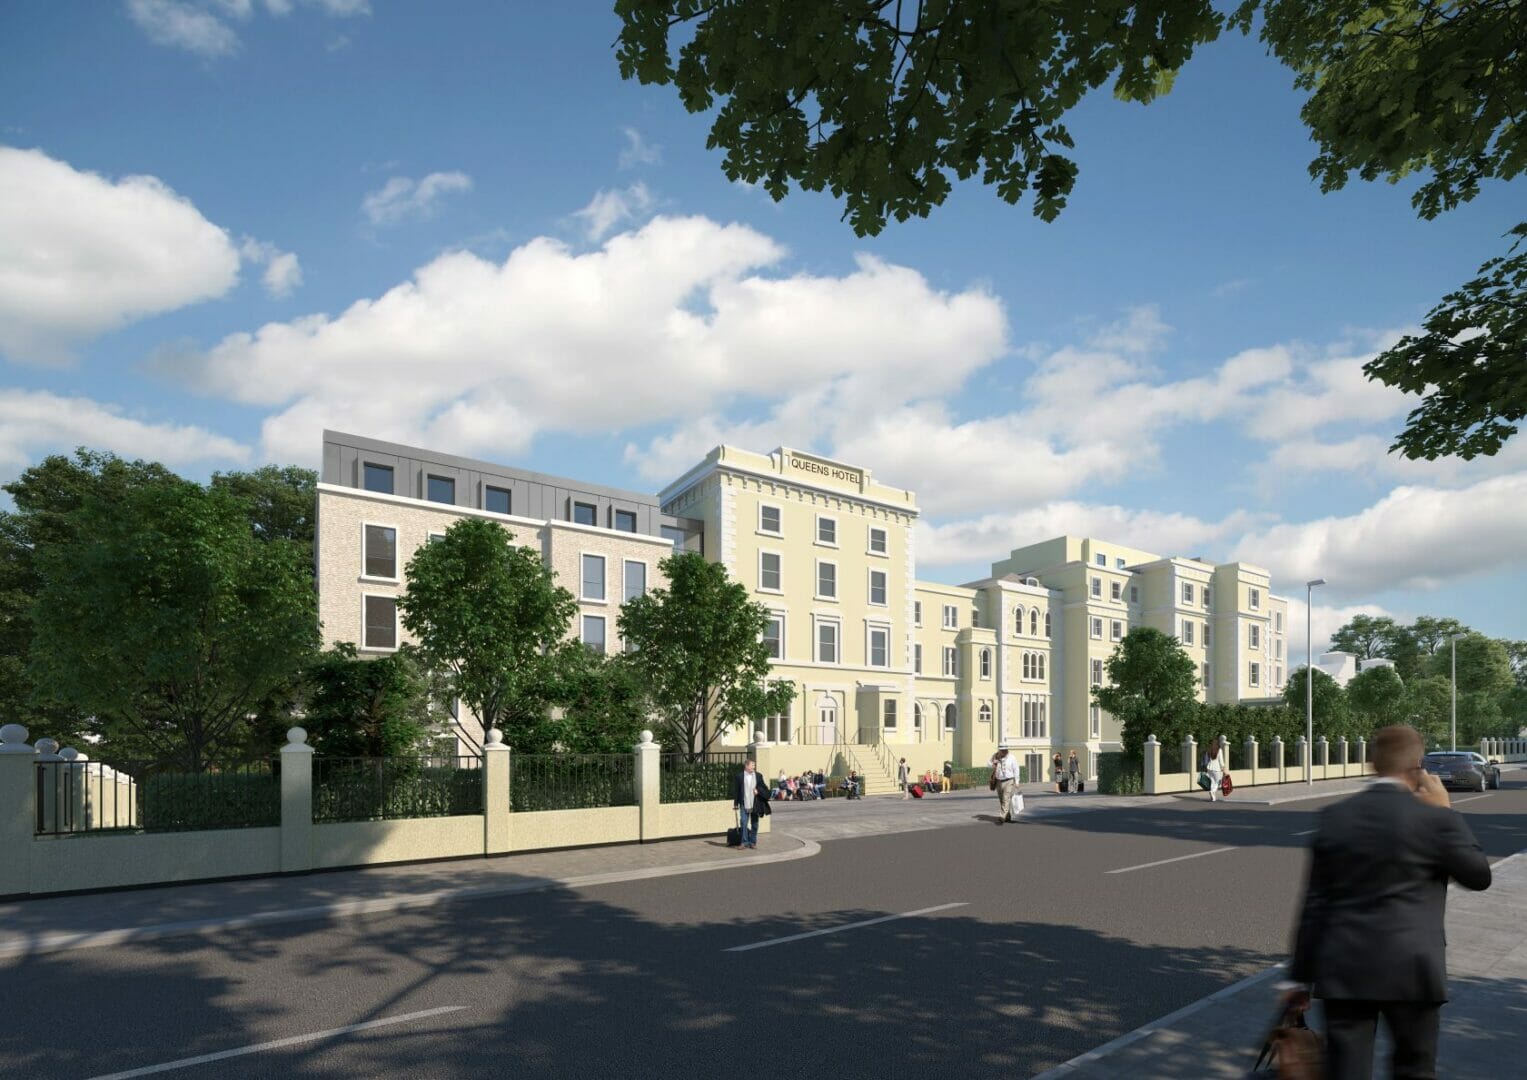 LHG gets green light for further regeneration of Crystal Palace’s historic Queens Hotel